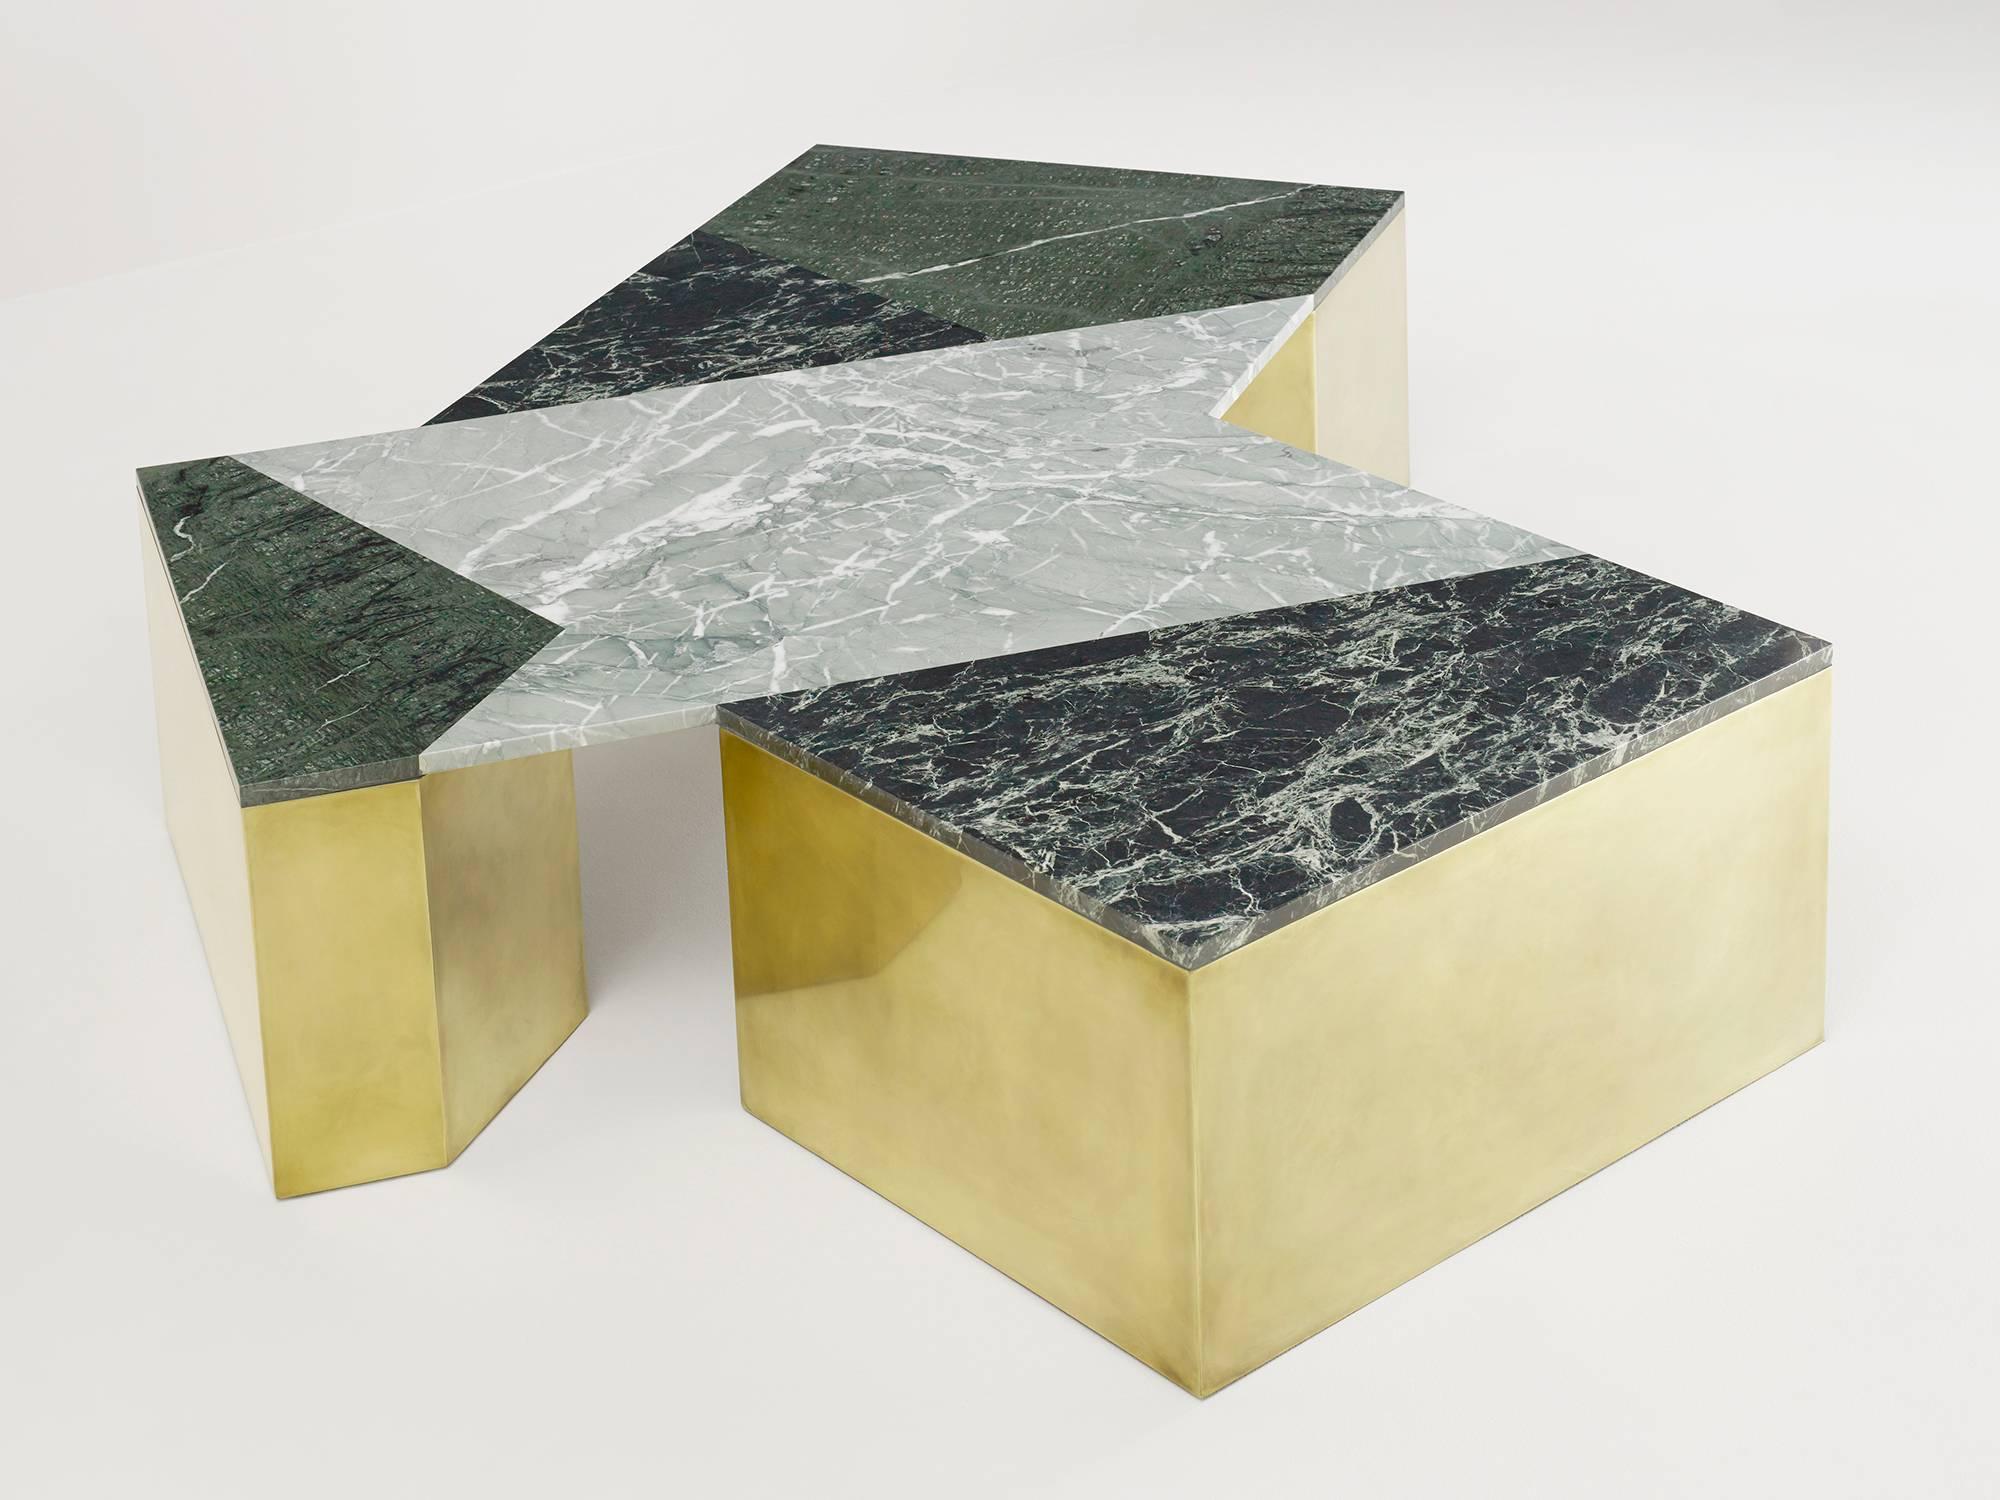 Geometric coffee table in mixed marble, brass, steel and wood by LA-based designer Brian Thoreen. This version, in green marble, was designed exclusively for Design Miami 2015. Other versions with custom metal finishes and marble configurations are